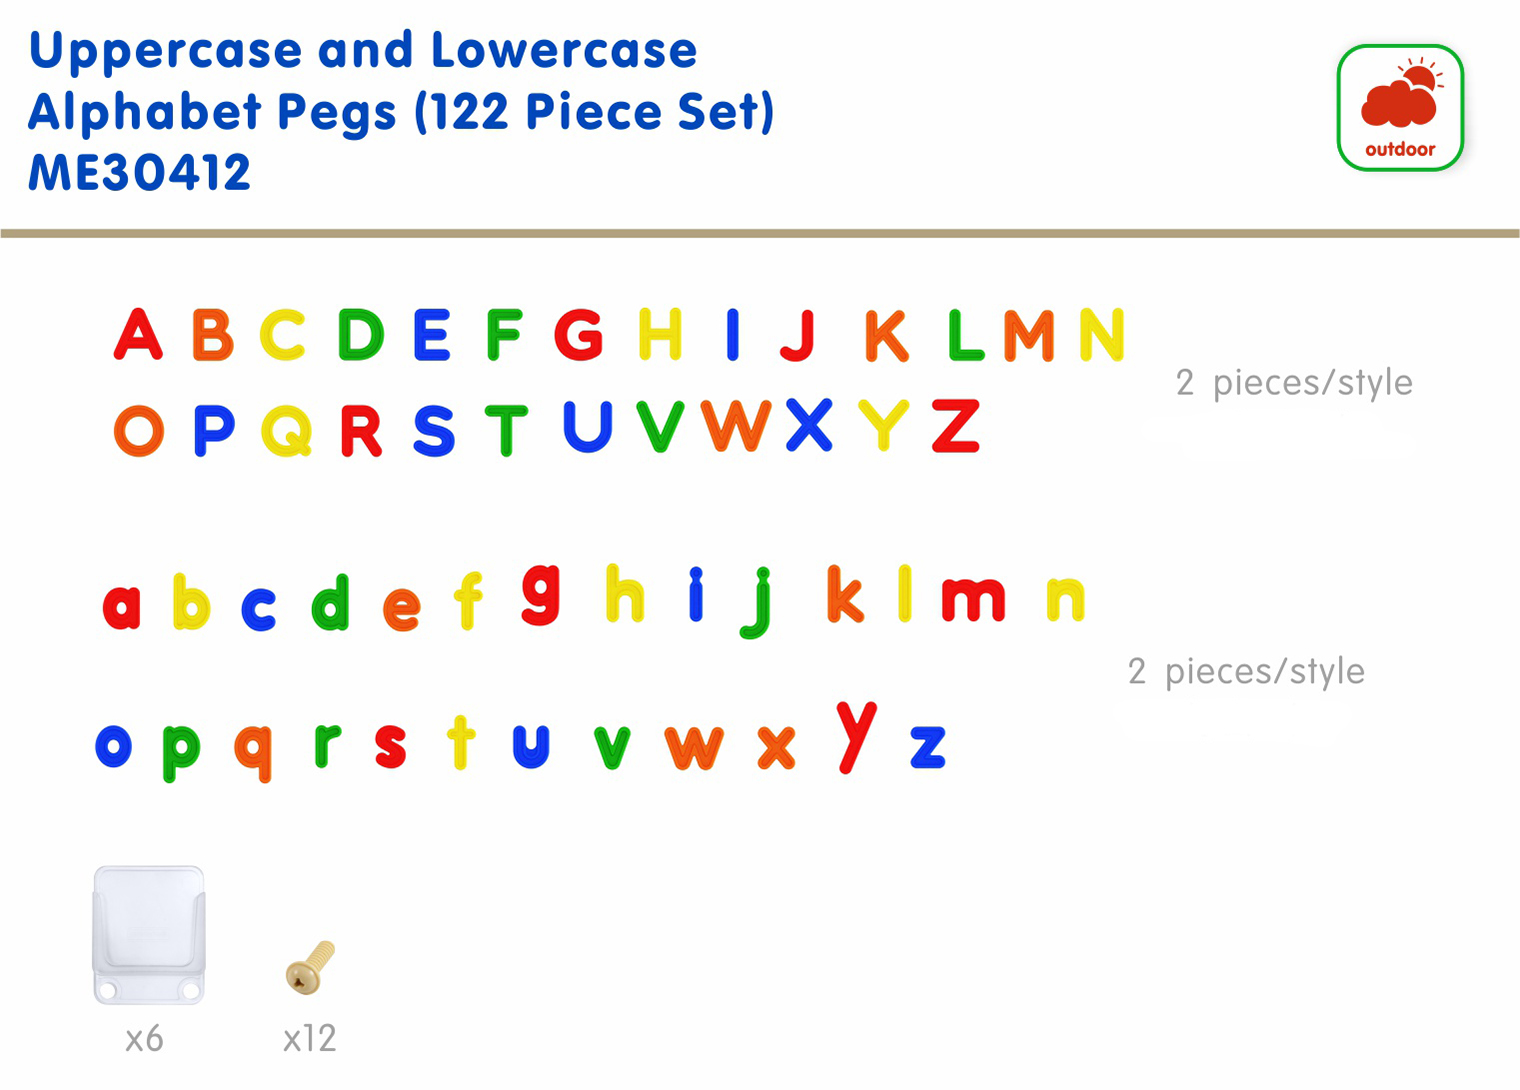 STEM WALL Upper and Lower-Case Alphabet Letters (120 Piece Set)